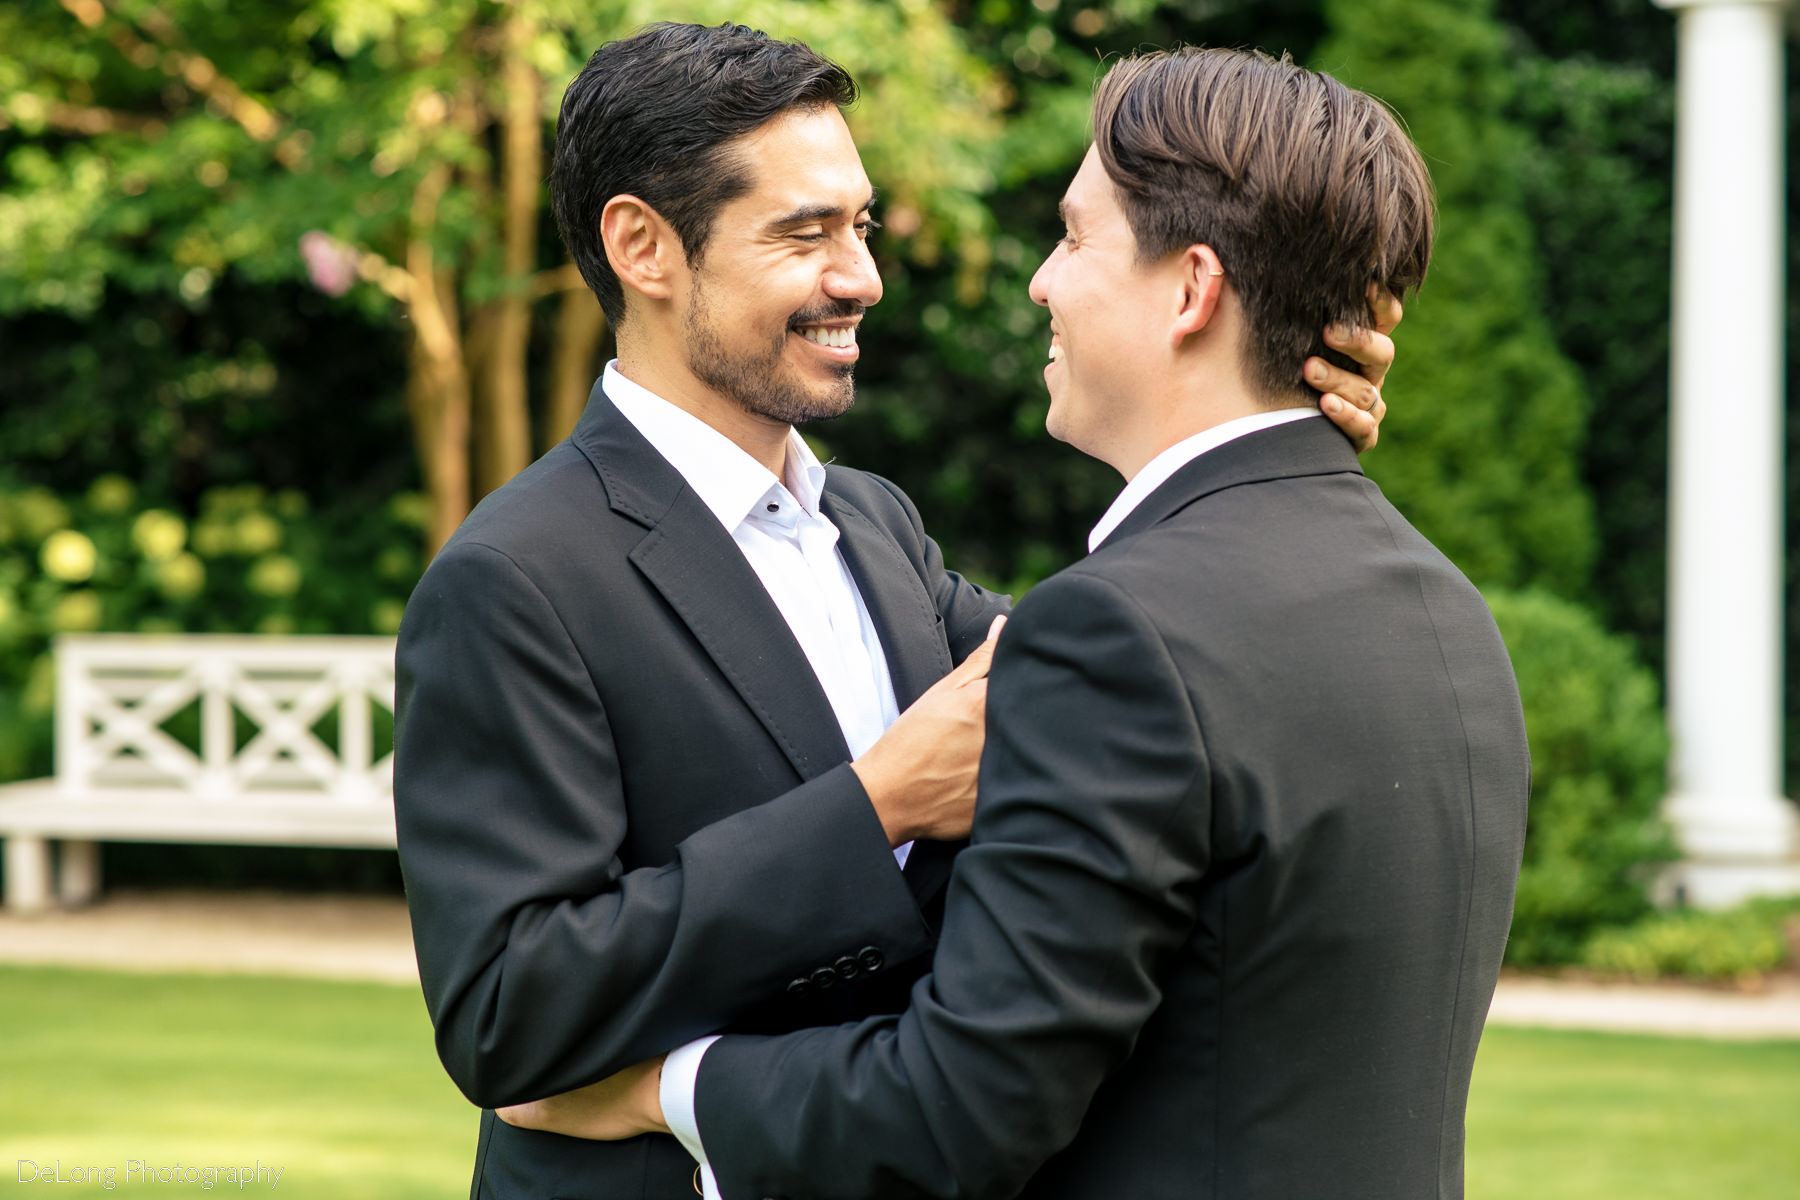 Candid moment of grooms laughing and smiling together in the gardens of the Duke Mansion by Charlotte wedding photographers DeLong Photography